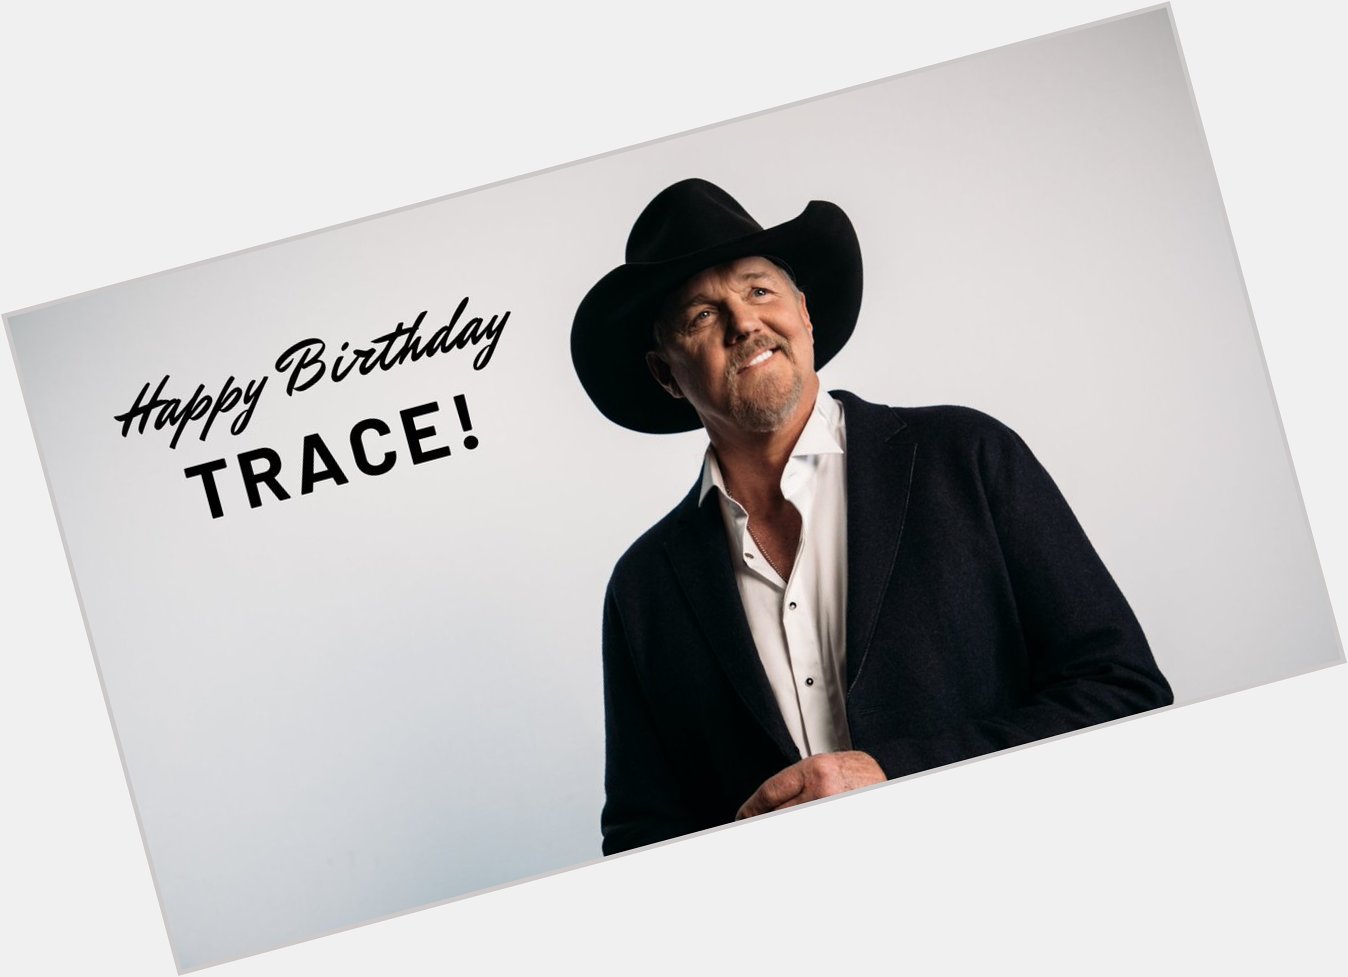 Happy birthday to the one and only, Trace Adkins!   Reply & leave him a birthday message! 